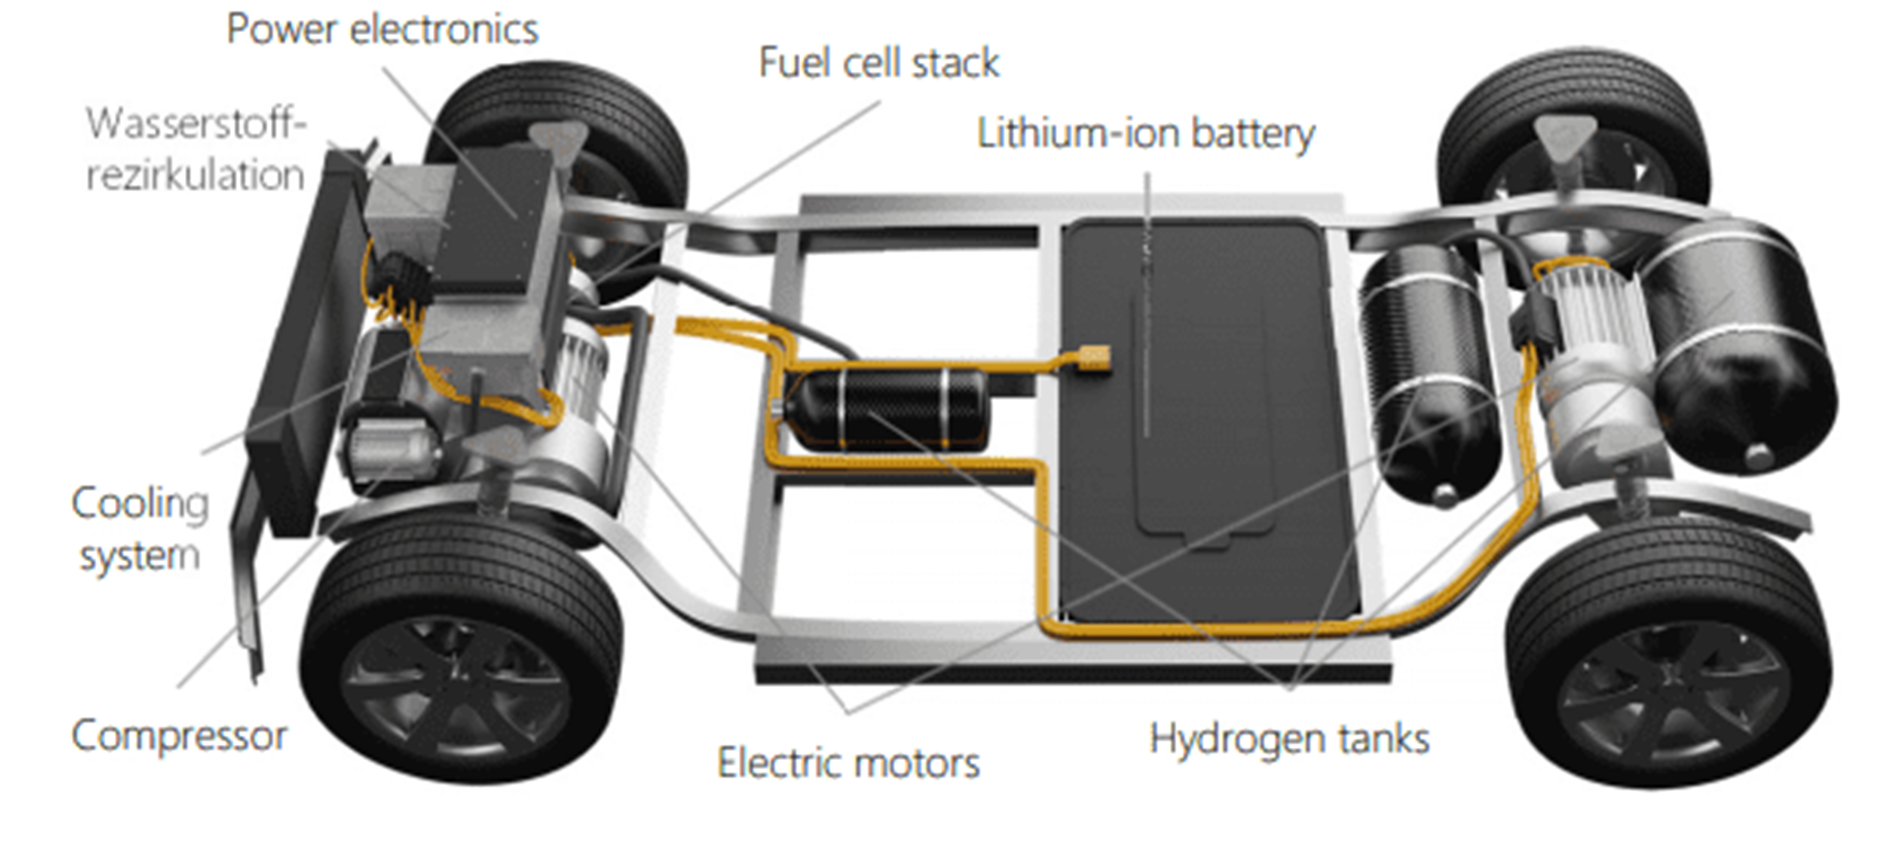 Industrialization of the production of fuel cell systems